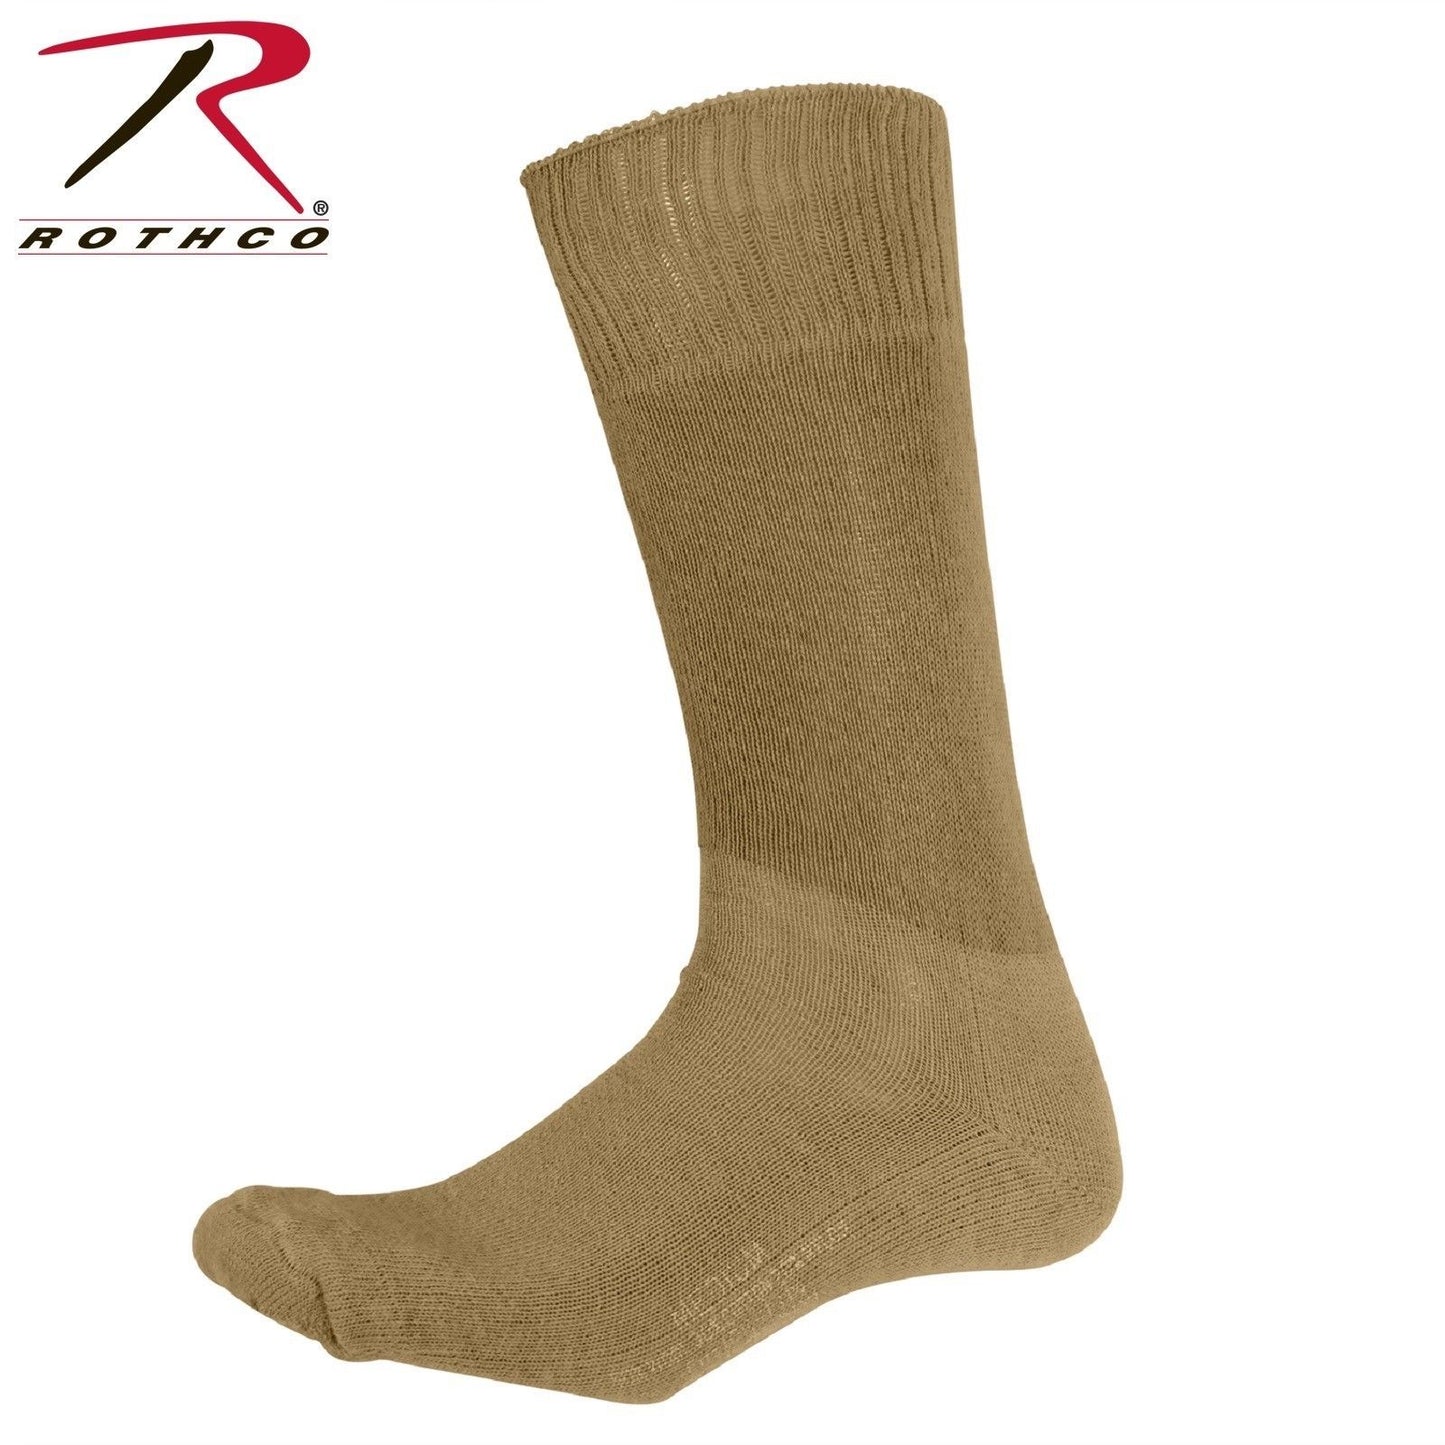 Rothco G.I. Type Cushion Sole Socks - Coyote Brown Government Issue Made In USA